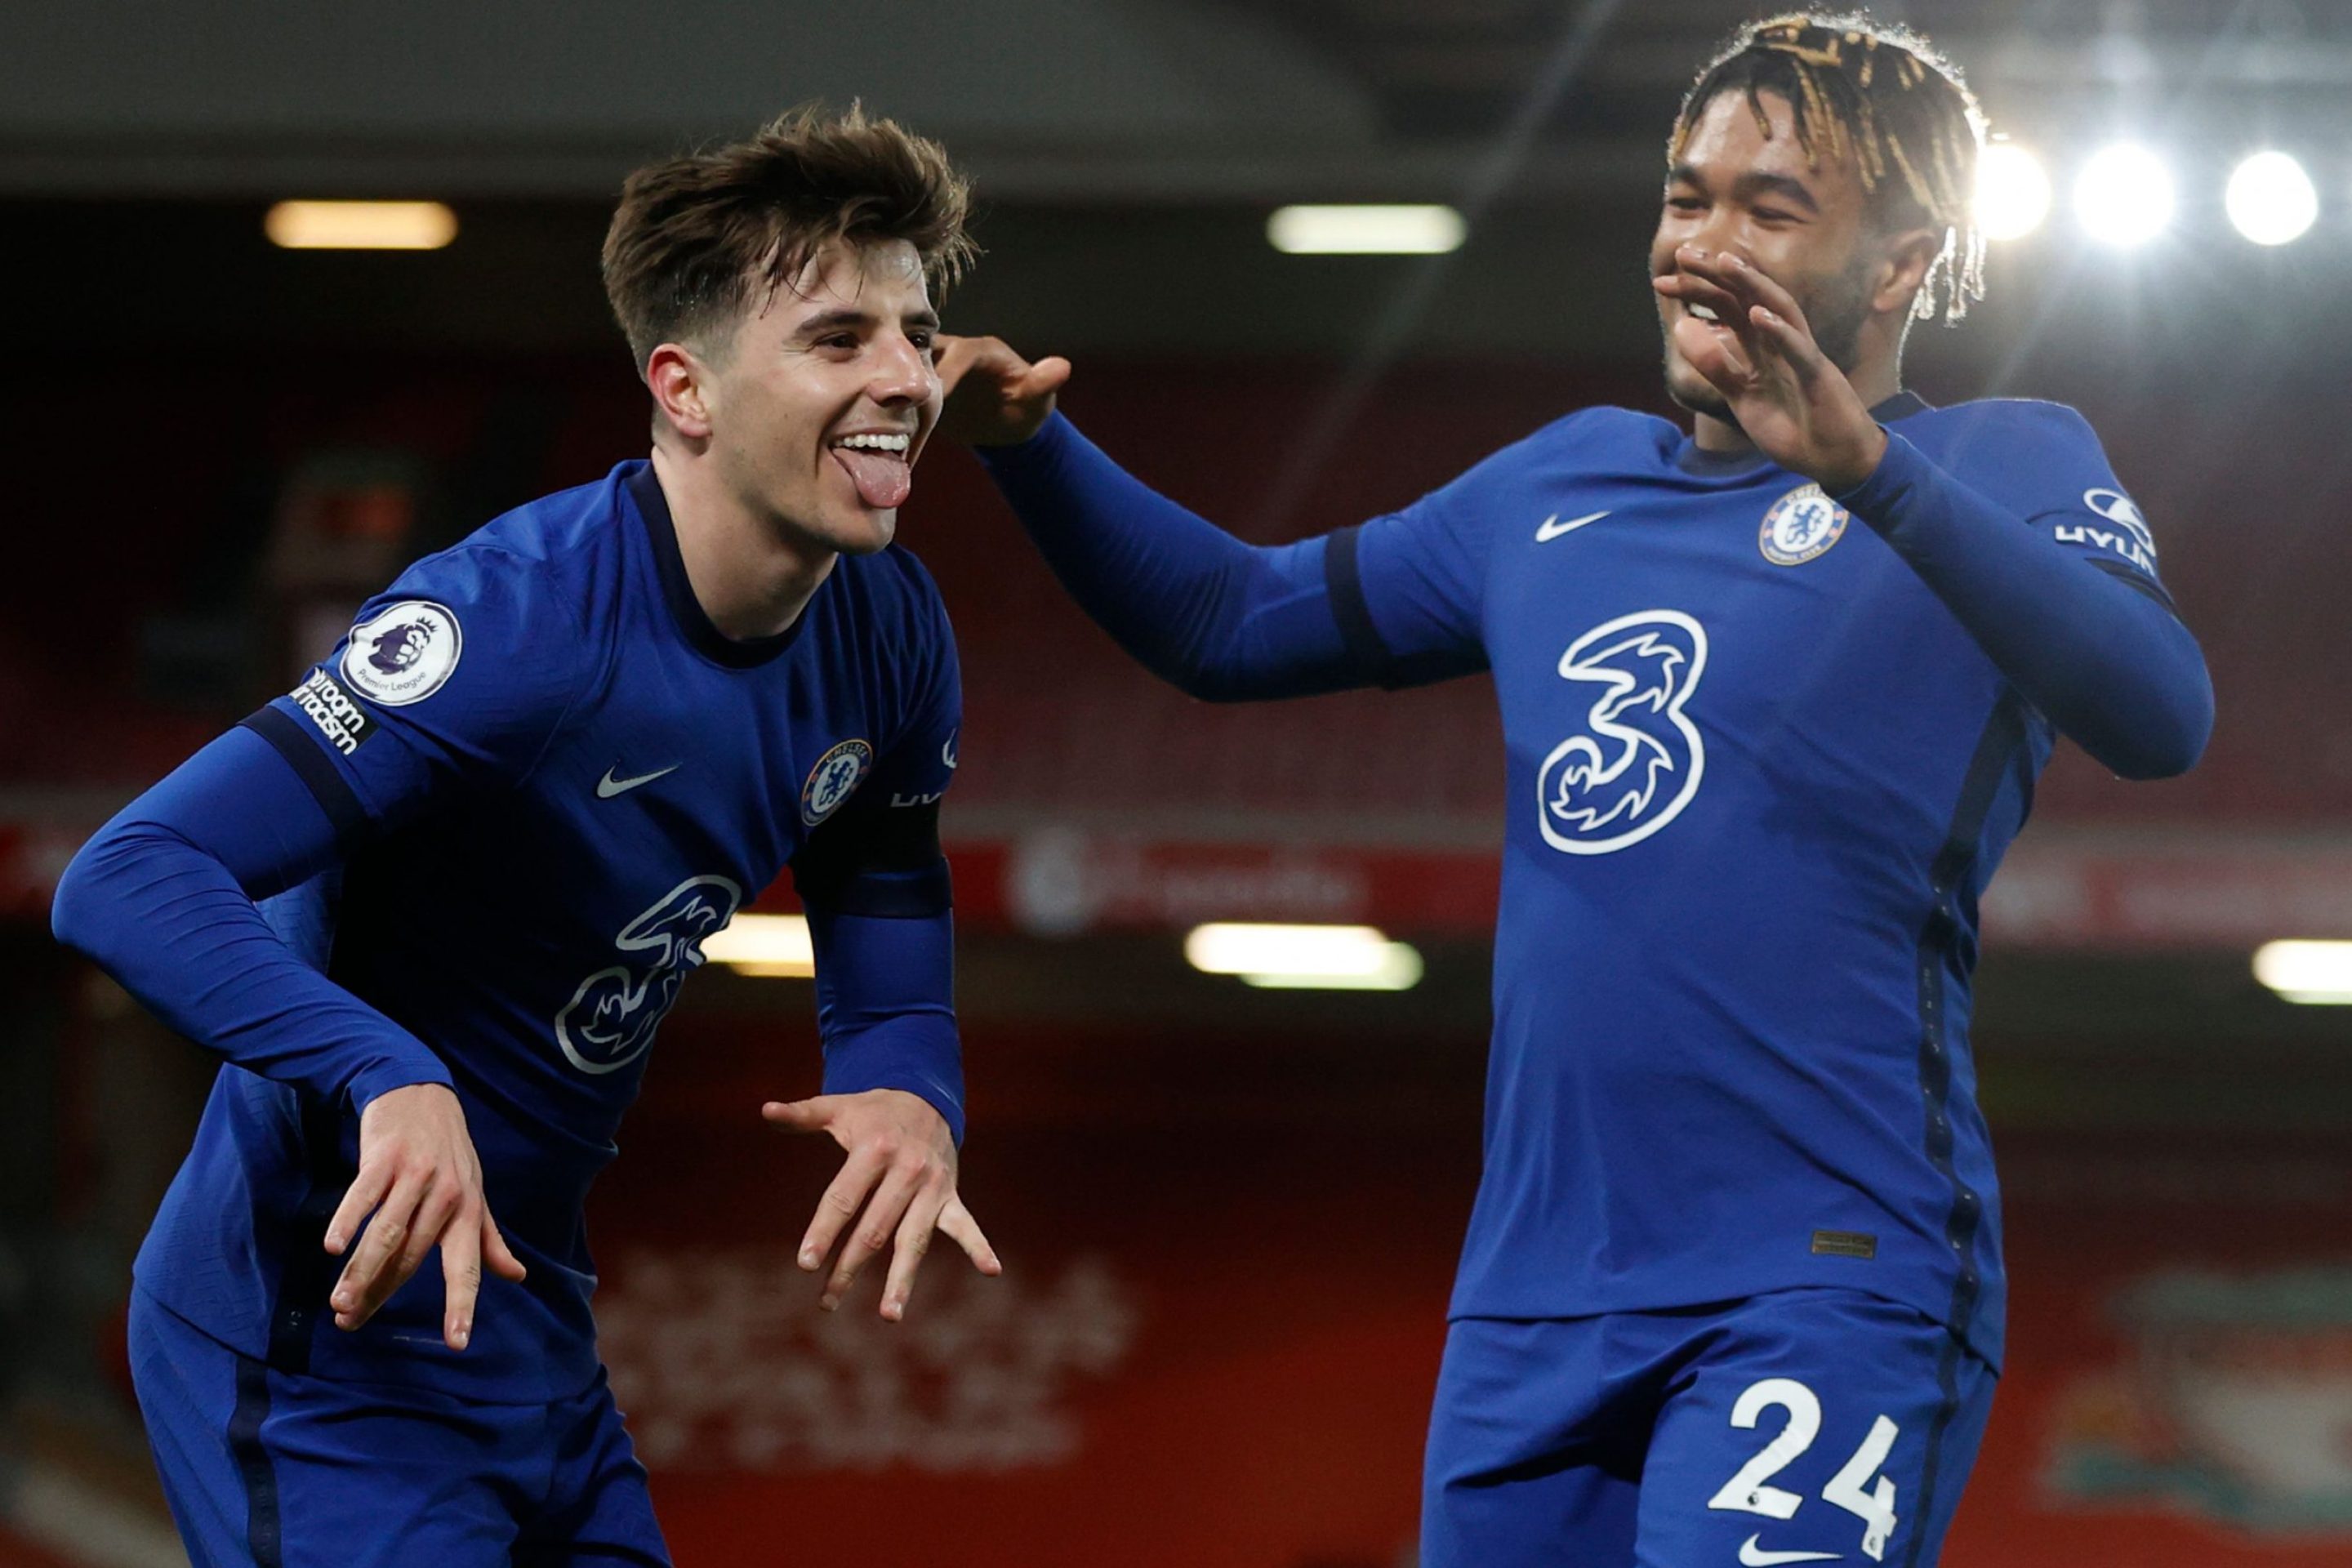 Chelsea's English midfielder Mason Mount (L) celebrates scoring the opening goal during the English Premier League football match between Liverpool and Chelsea at Anfield in Liverpool, north west England on March 4, 2021.